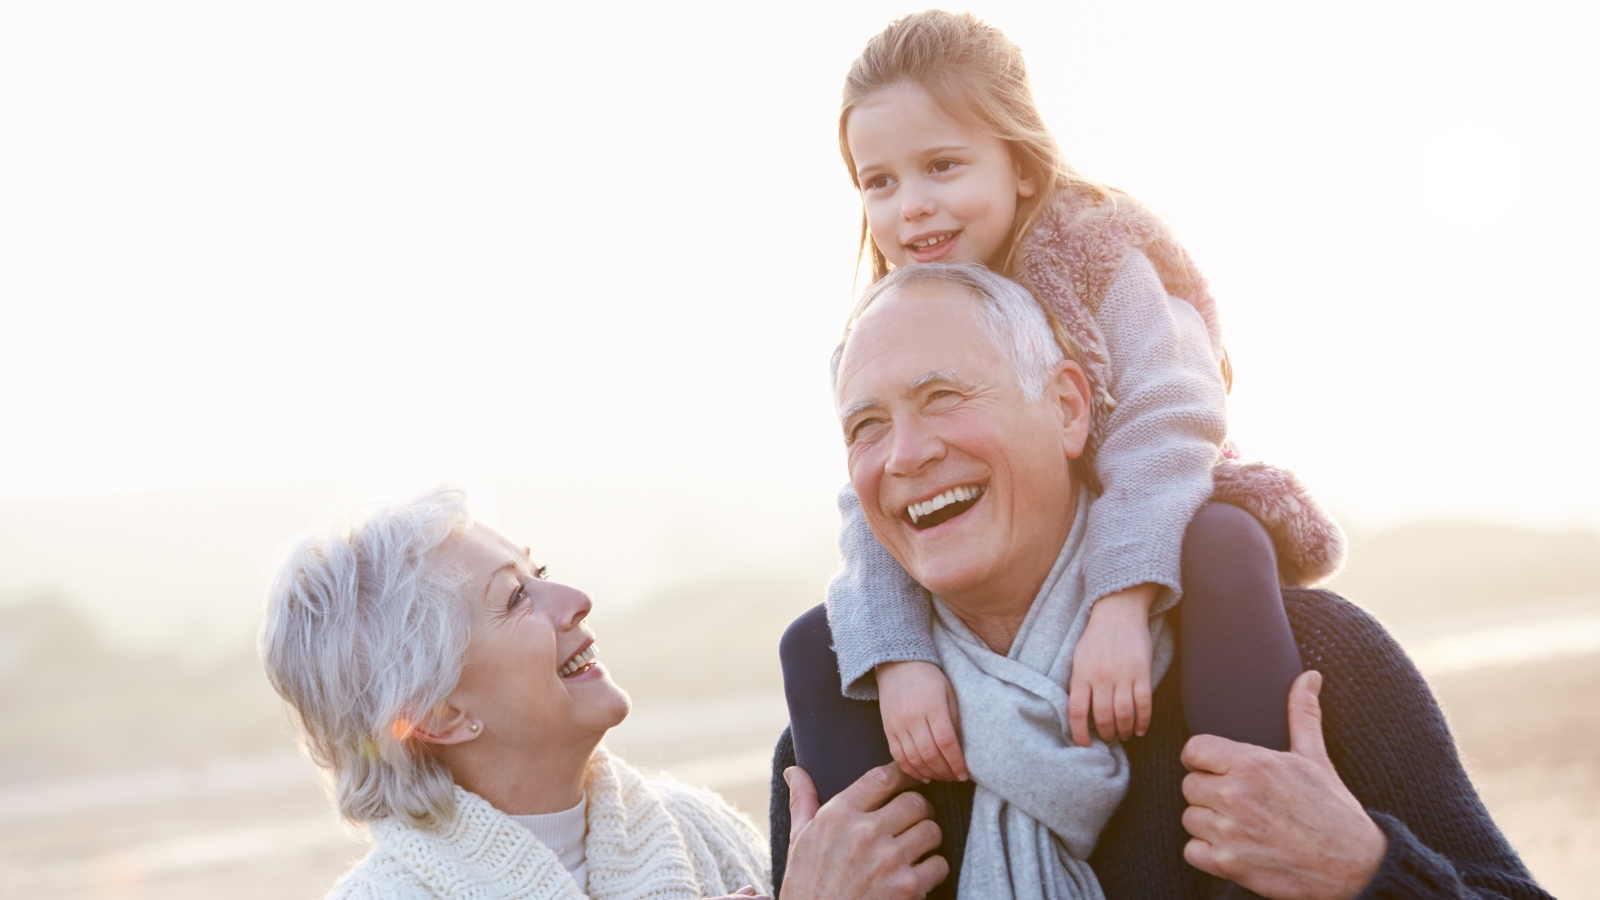 <p><span>The joy of being grandparents brings a unique dimension to relationships. Sharing love and laughter with little ones strengthens the bond between partners and creates a heartwarming chapter in their shared story.</span></p>